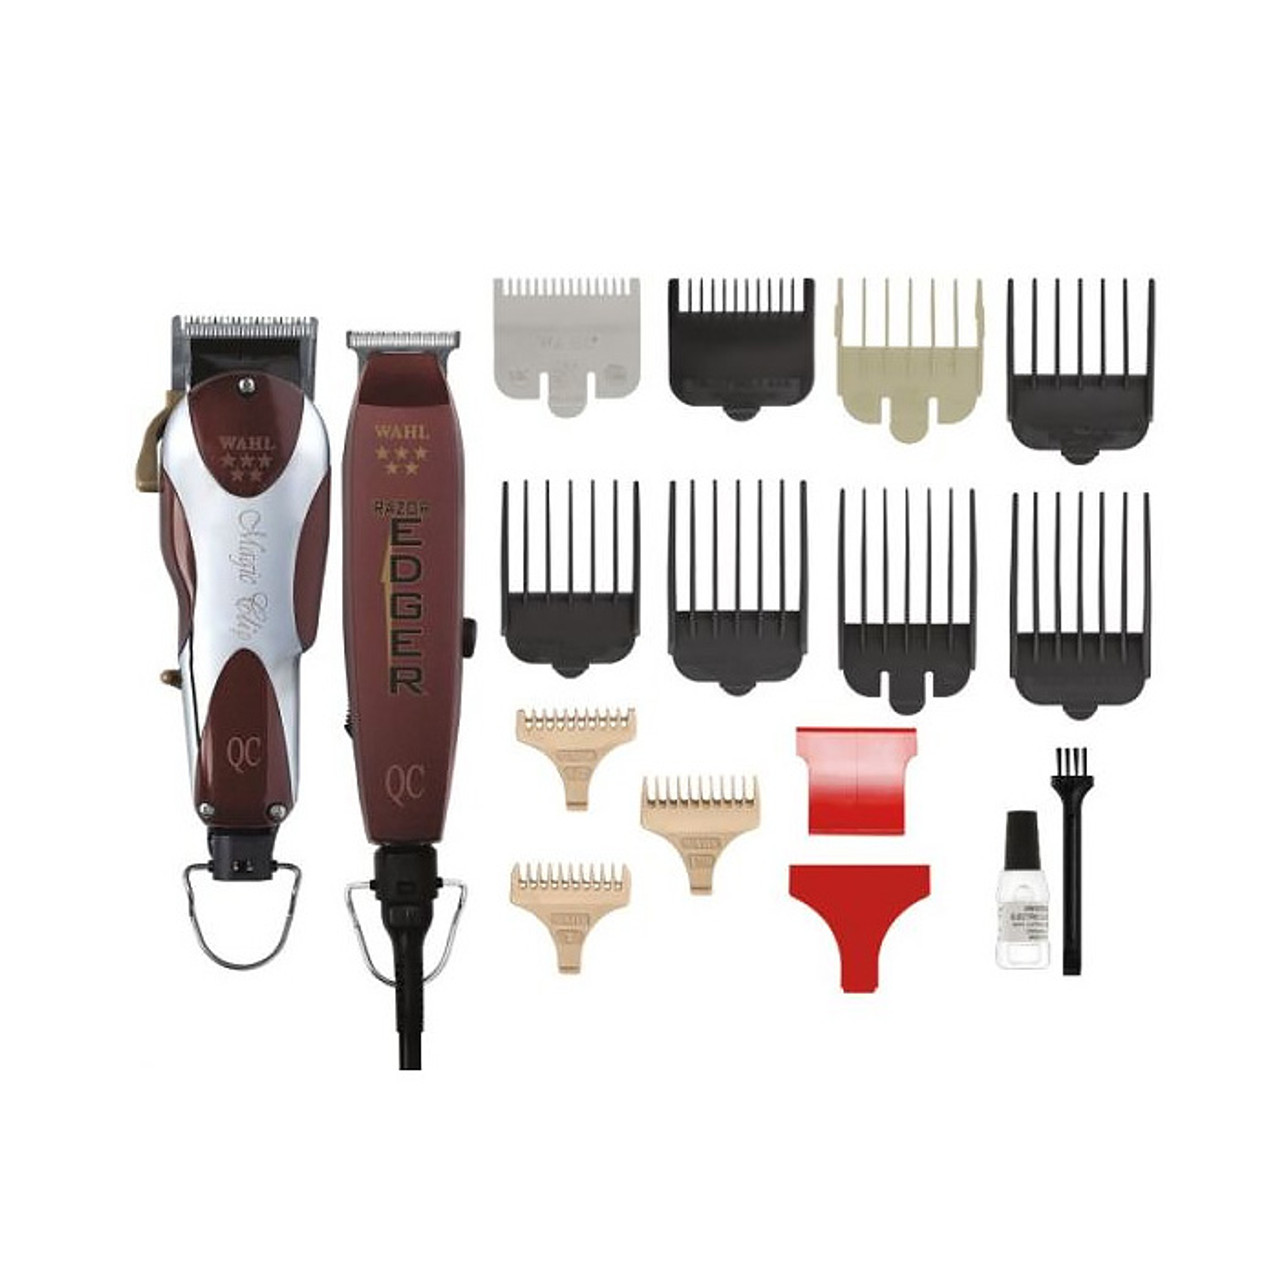 wahl professional clippers combo